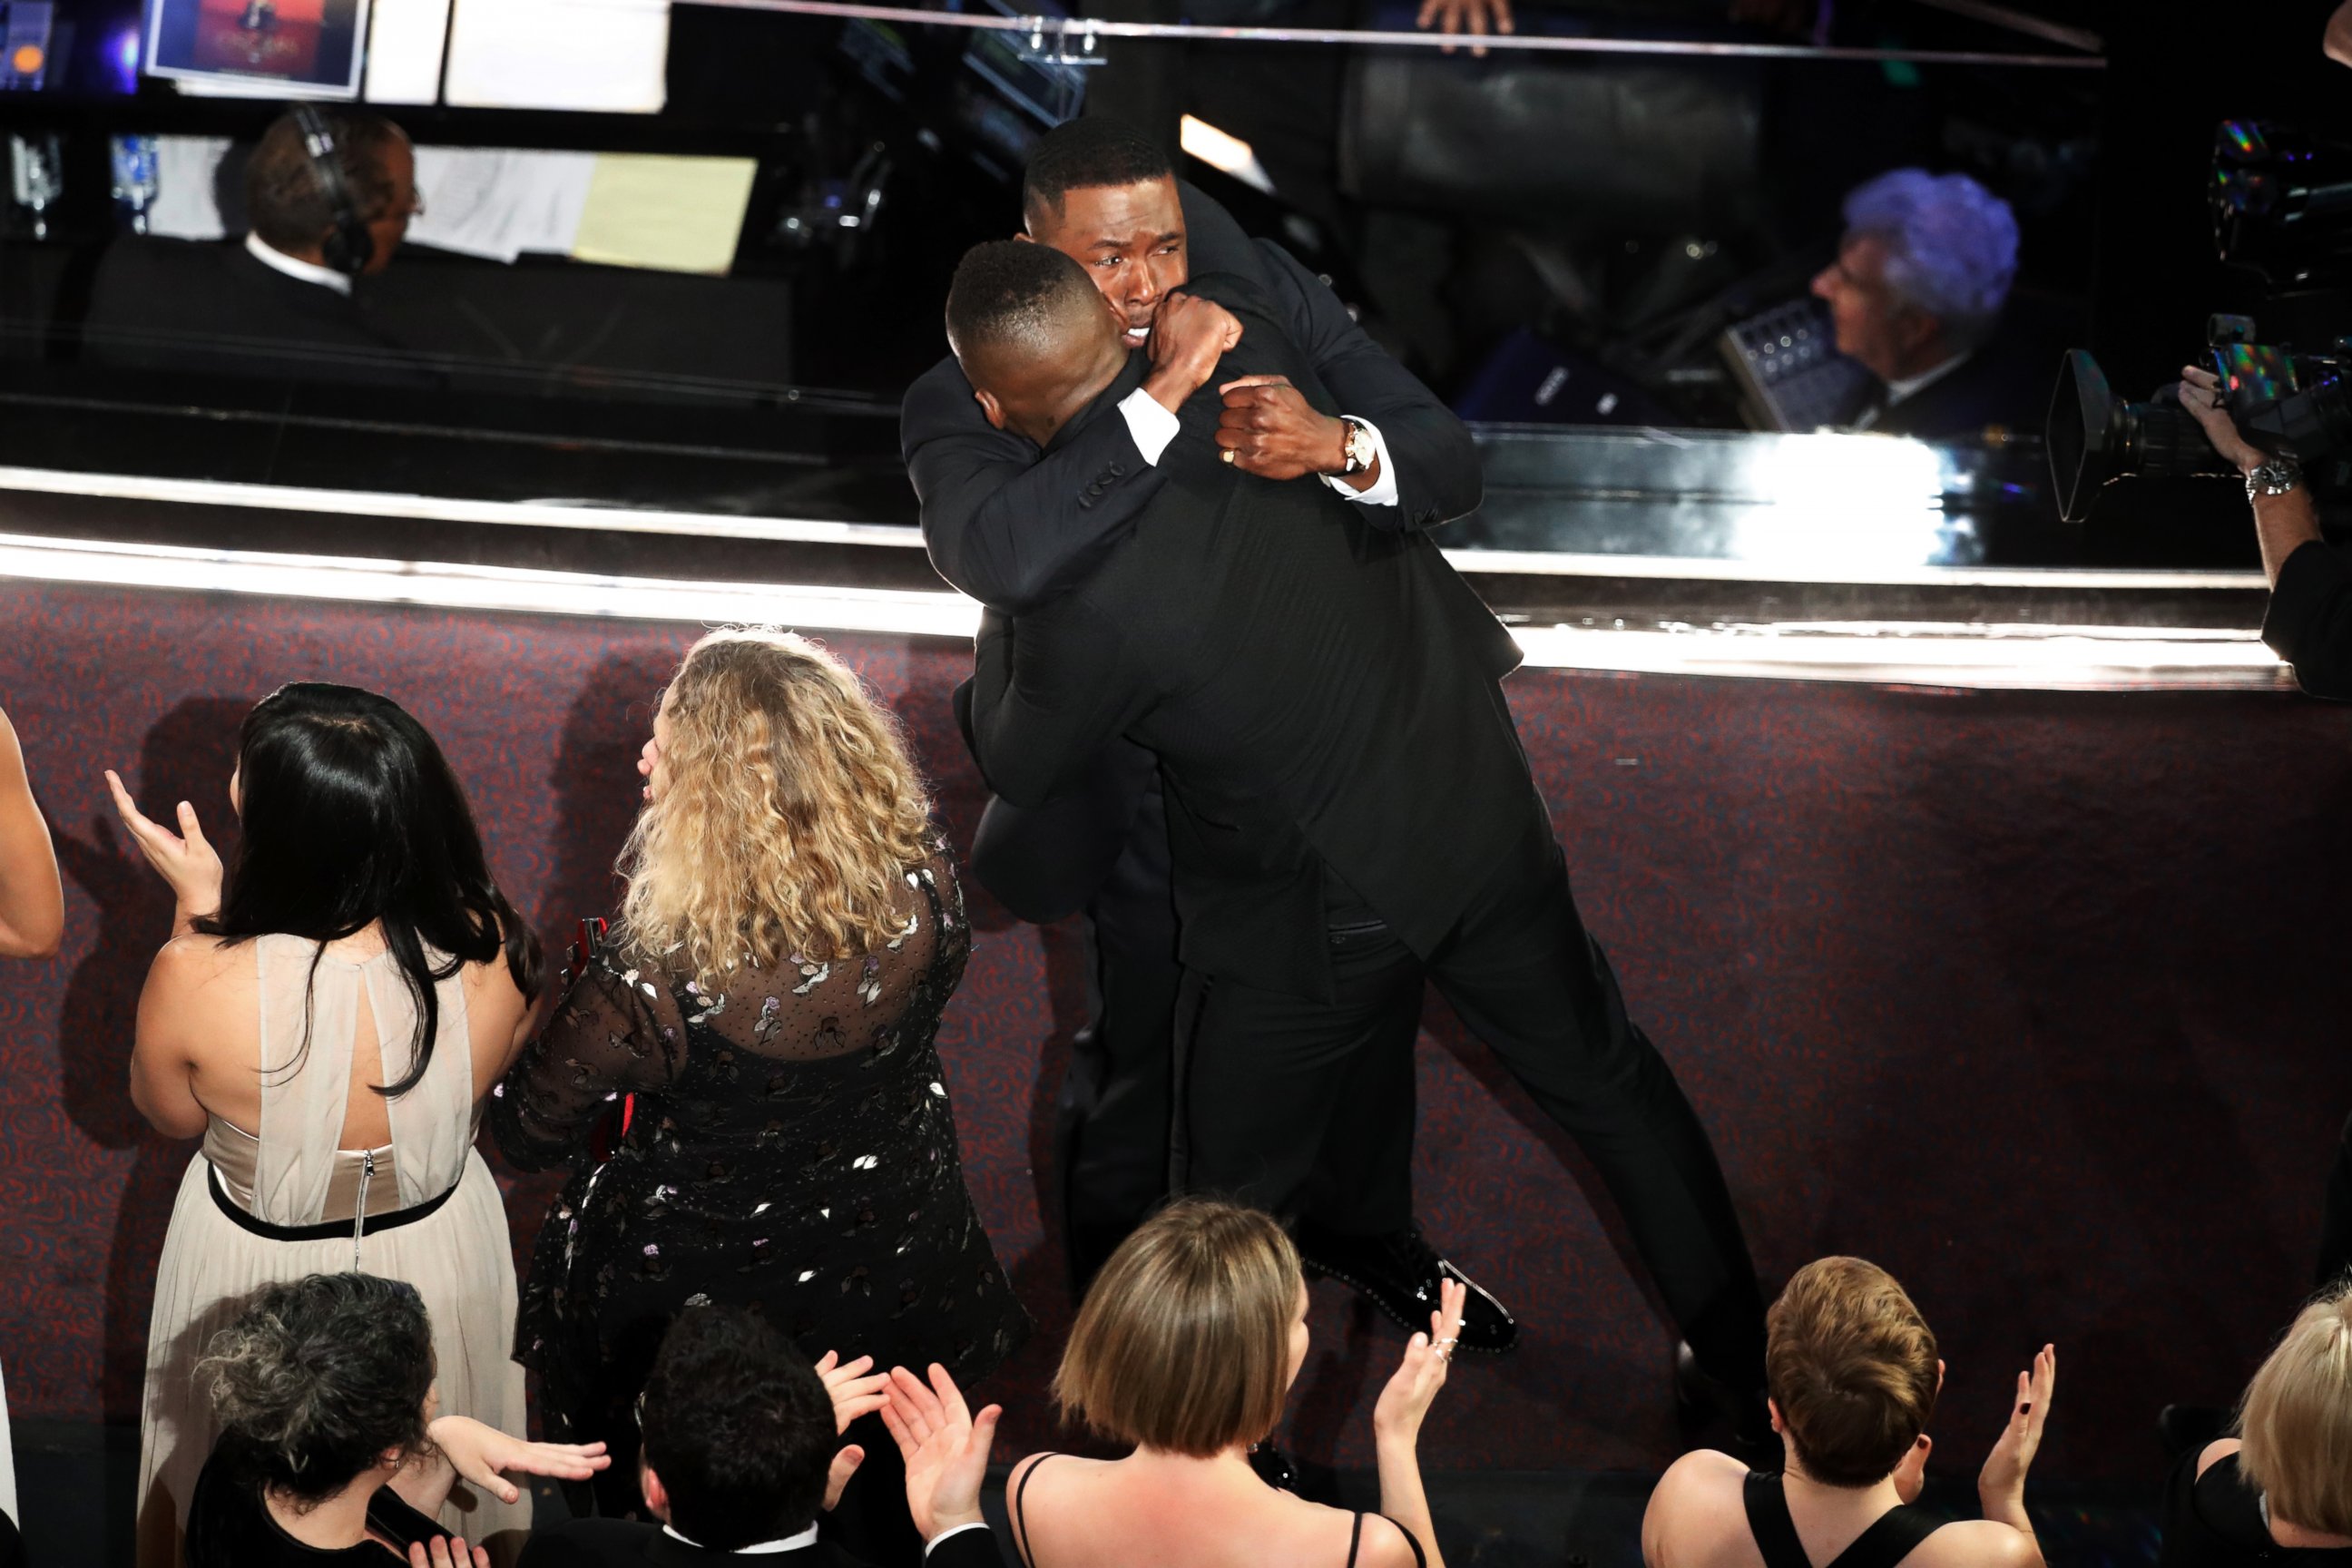 PHOTO: "Moonlight" castmembers Mahershala Ali and Trevante Rhodes hug after it was announced that the movie won Best Picture during the telecast of the 89th Academy Awards on Feb. 26, 2017 in Hollywood, Calif.